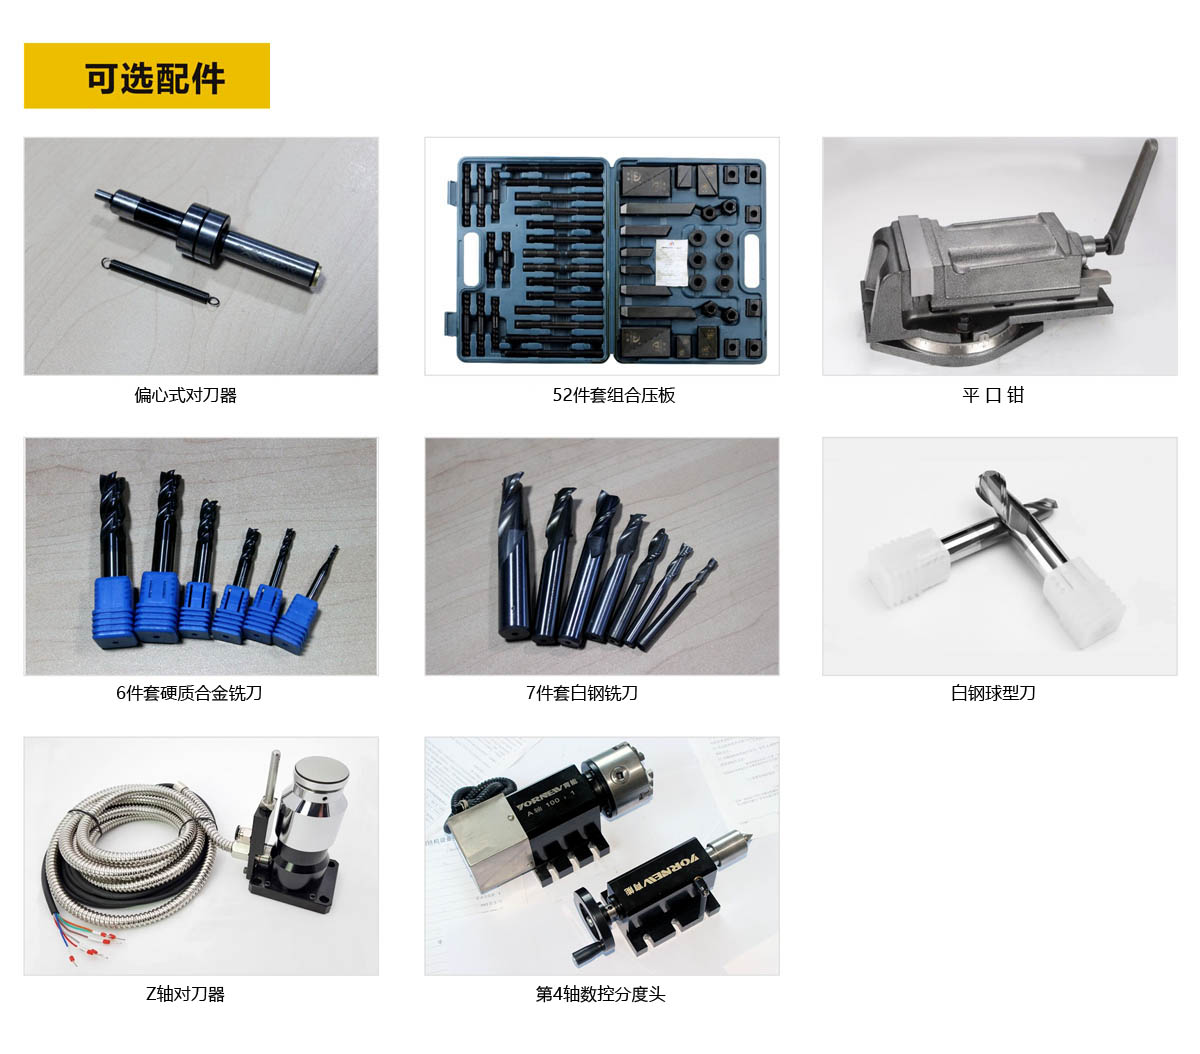 Small CNC Lathe optional accessories